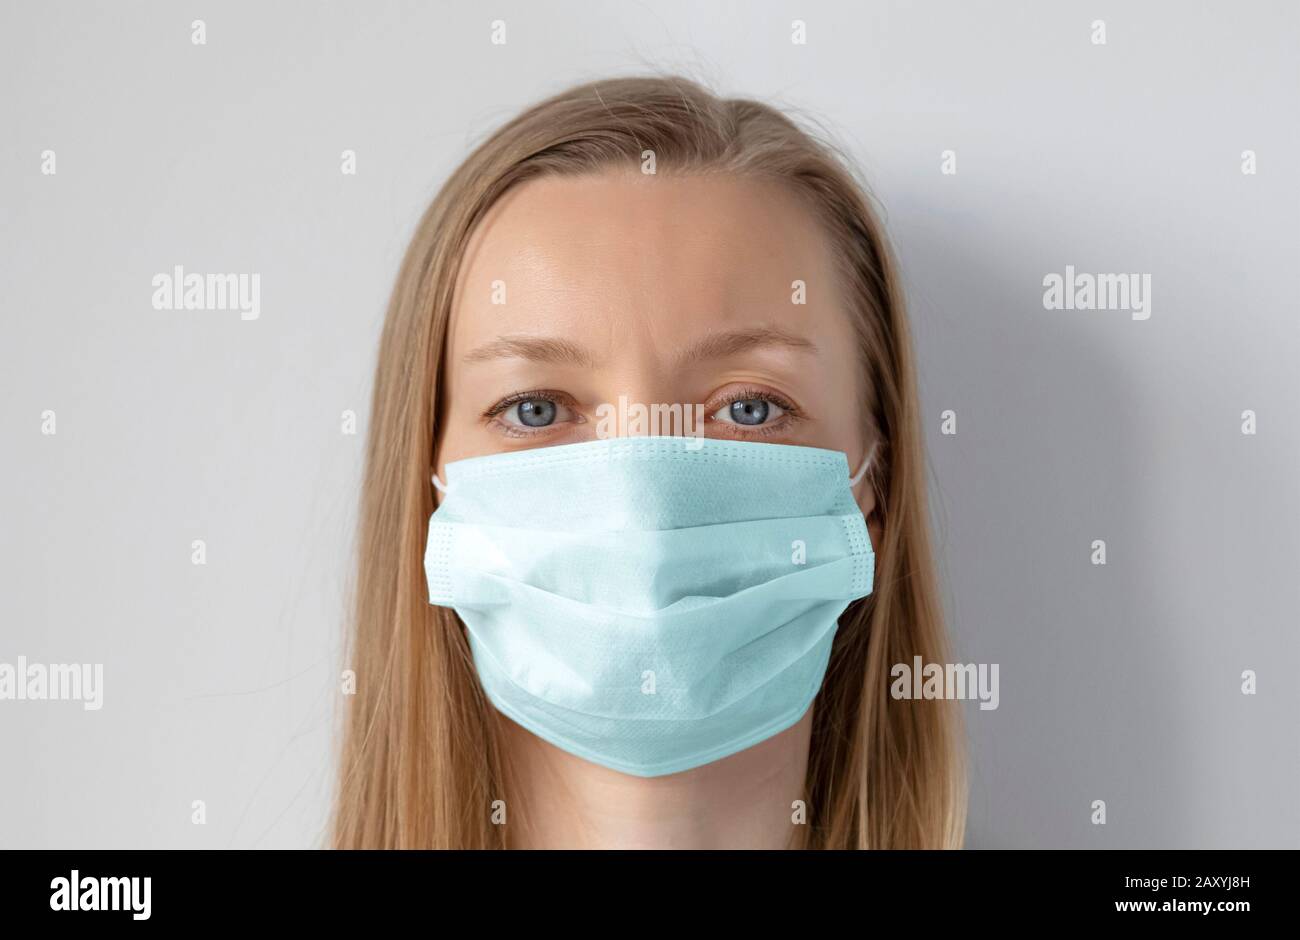 Light hair woman wearing medical mask for protection against virus Stock Photo